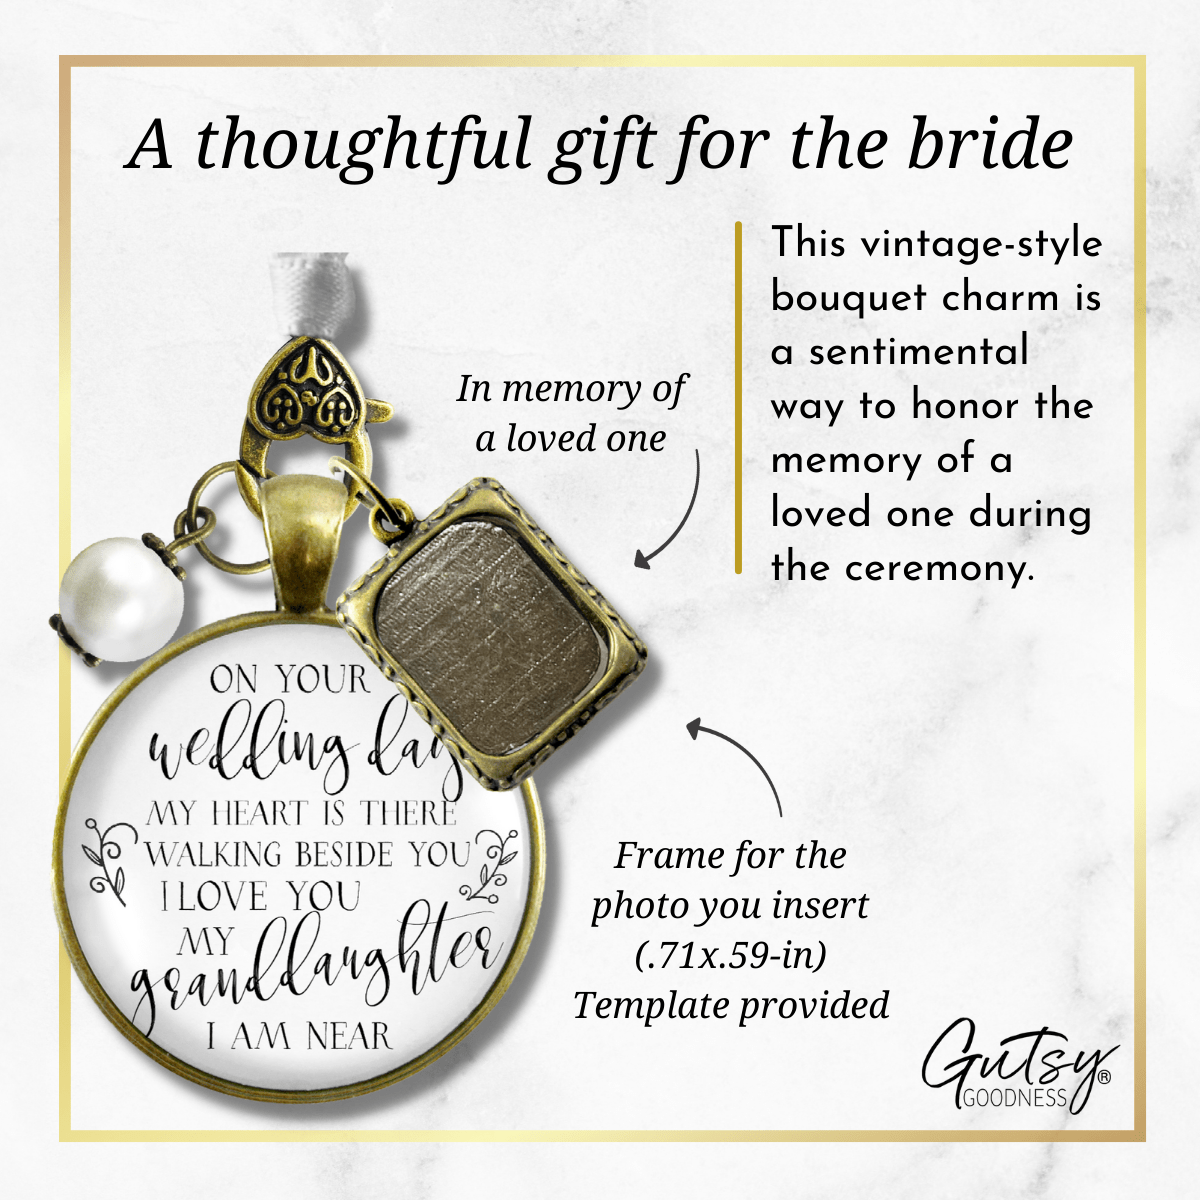 On Your Wedding Day MY Heart Is There Walking Beside You GRANDDAUGHTER - BRONZE - WHITE - WHITE BEAD